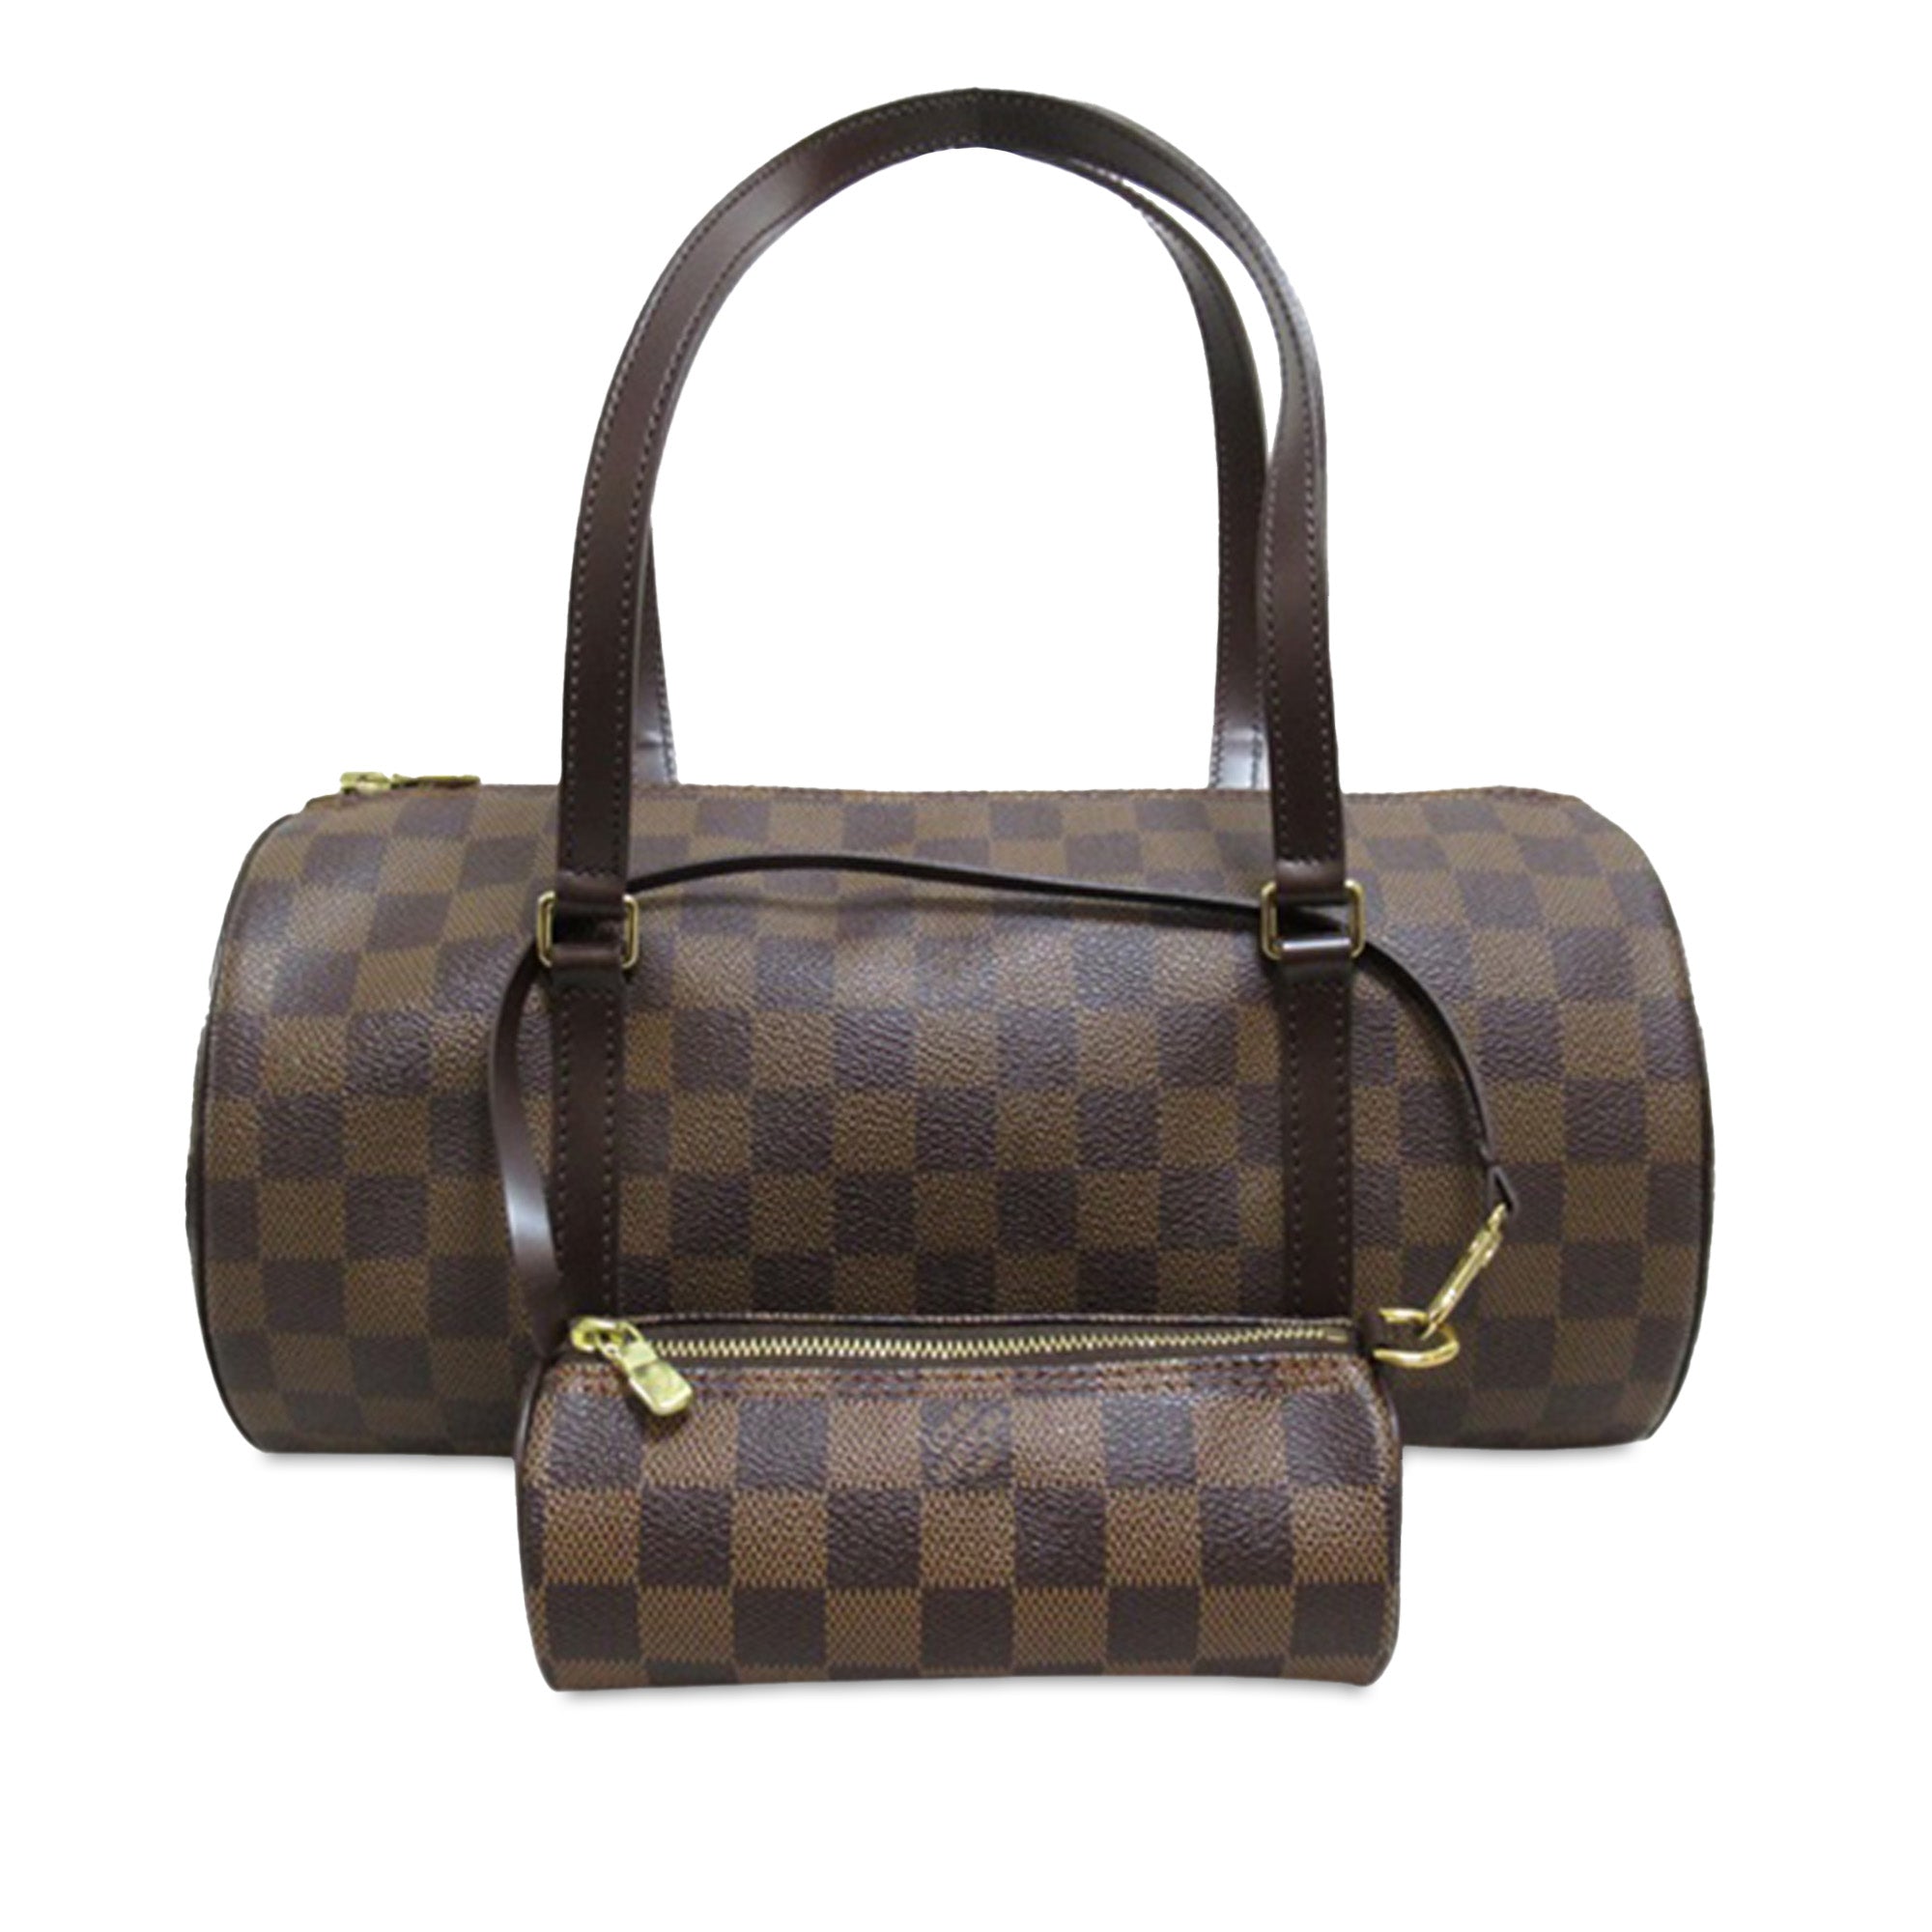 Louis Vuitton Soufflot BB handbag in brown monogram canvas and pink leather